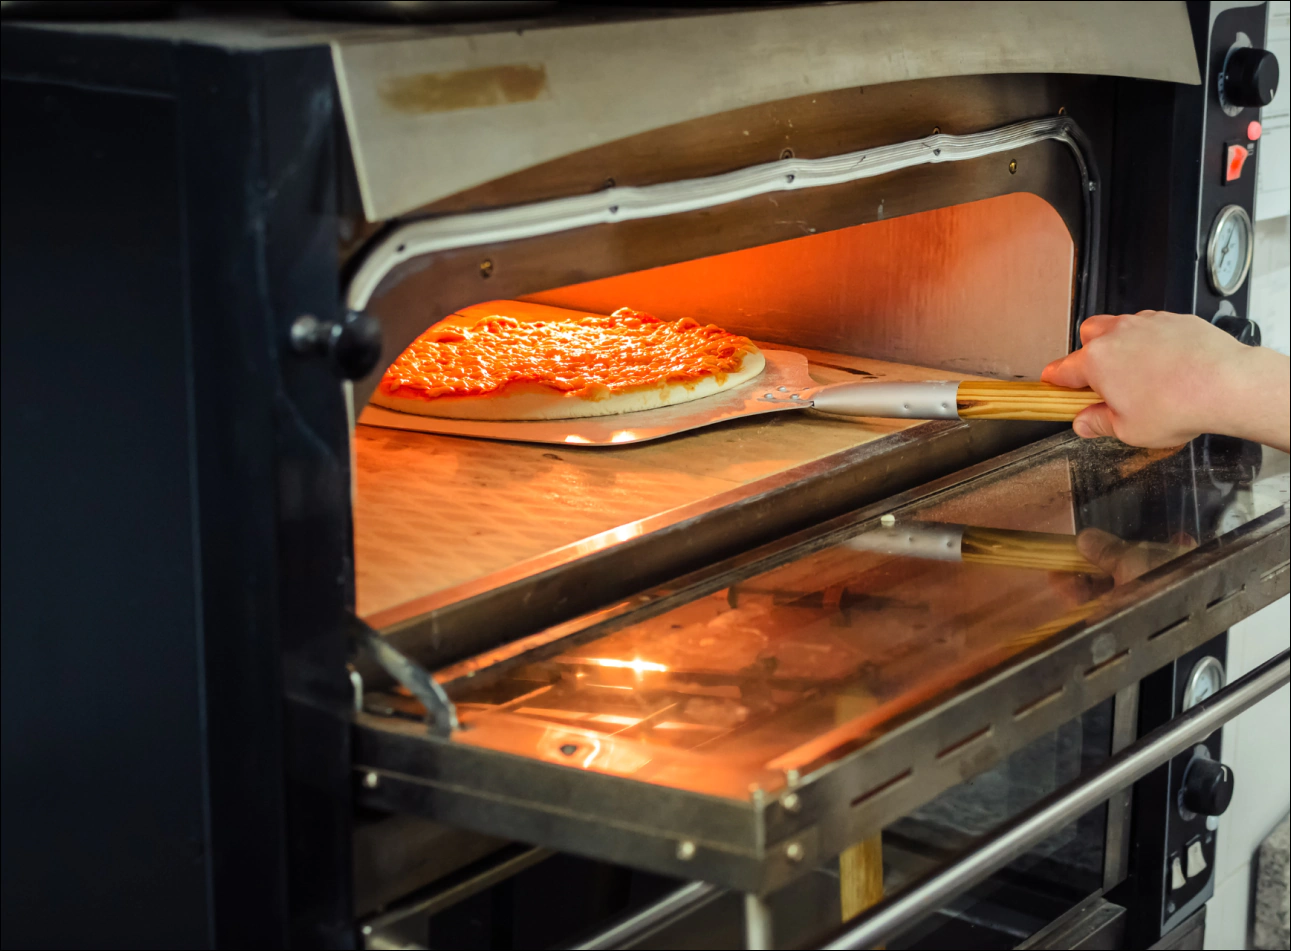 a pizza being cooked on an electric oven